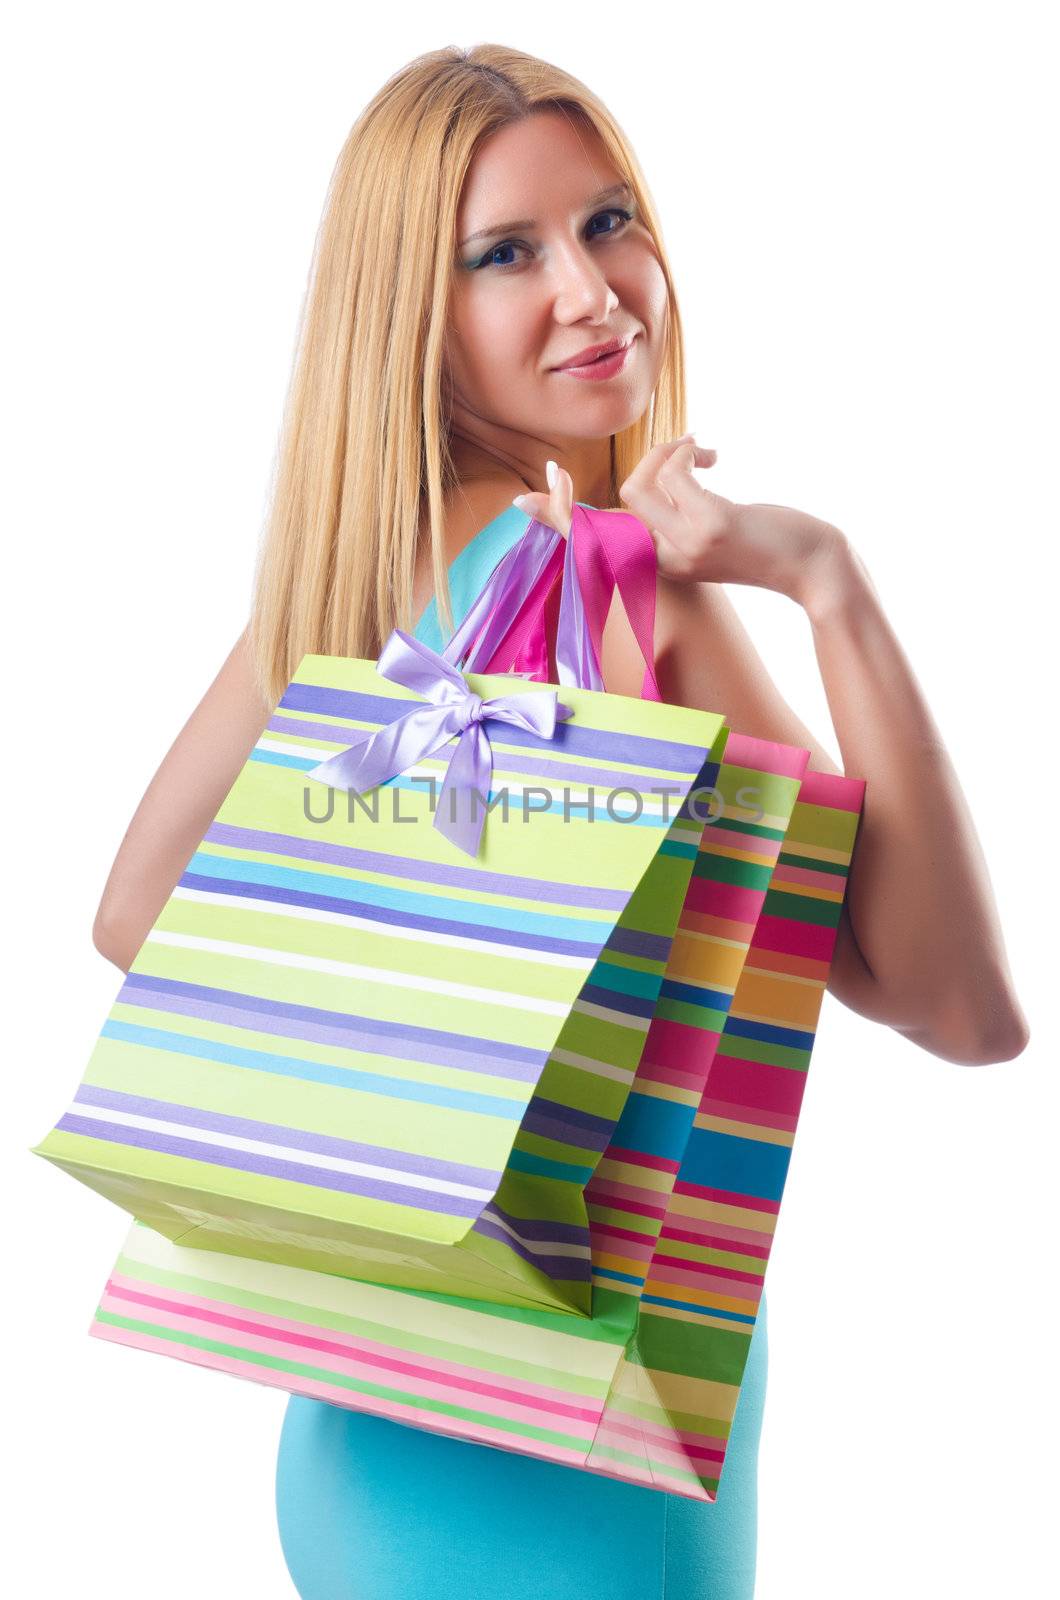 Attractive woman after happy shopping